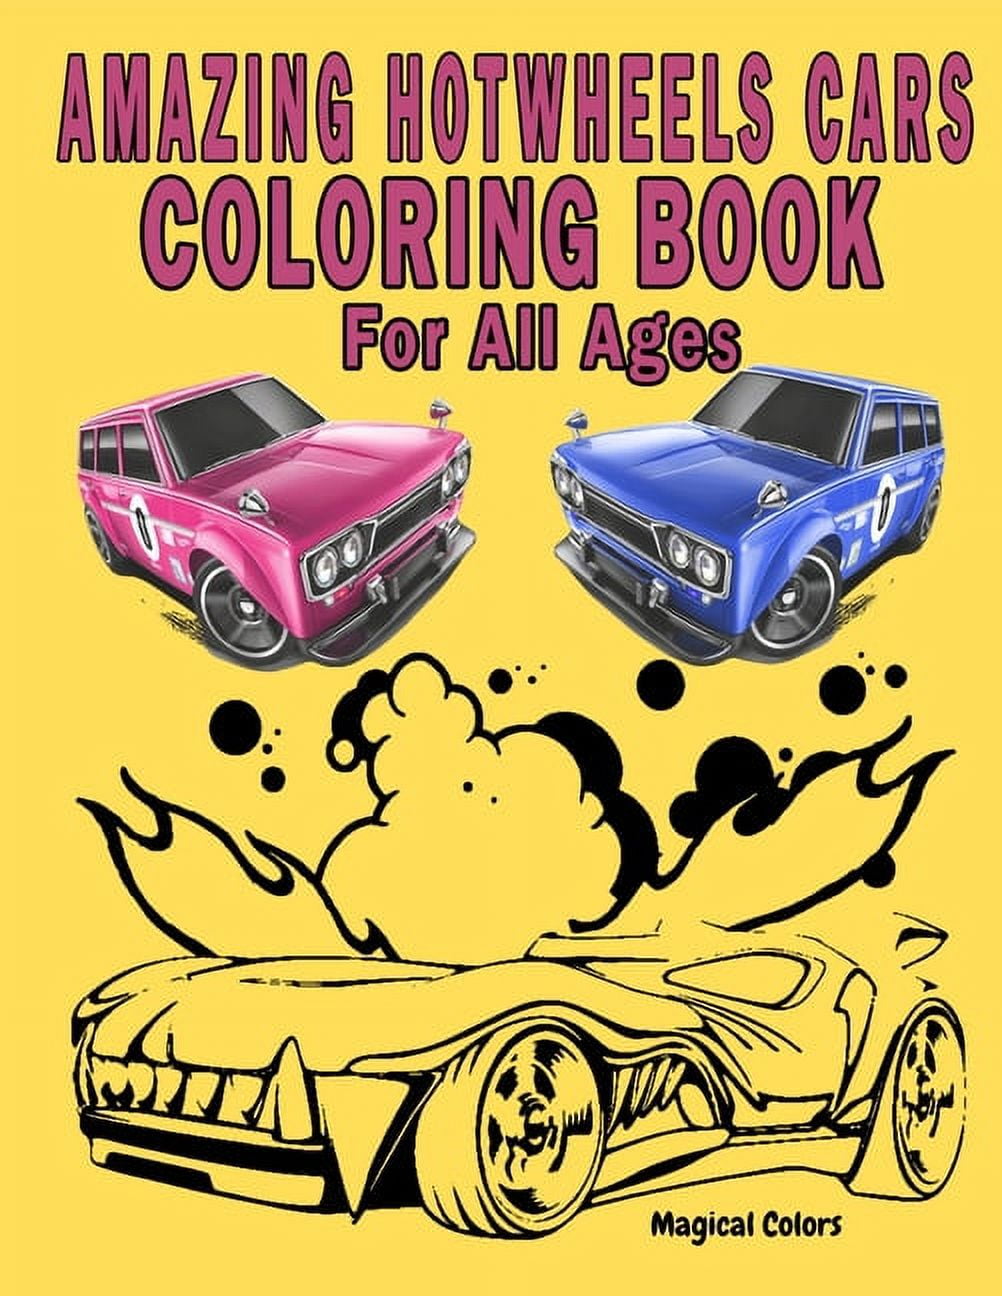 Supercar Coloring Book For Kids Ages 8-12: Amazing Collection of Cool Cars  Coloring Pages - Cars Activity Book For Kids Ages 6-8 And 8-12, Boys And Gi  (Paperback)